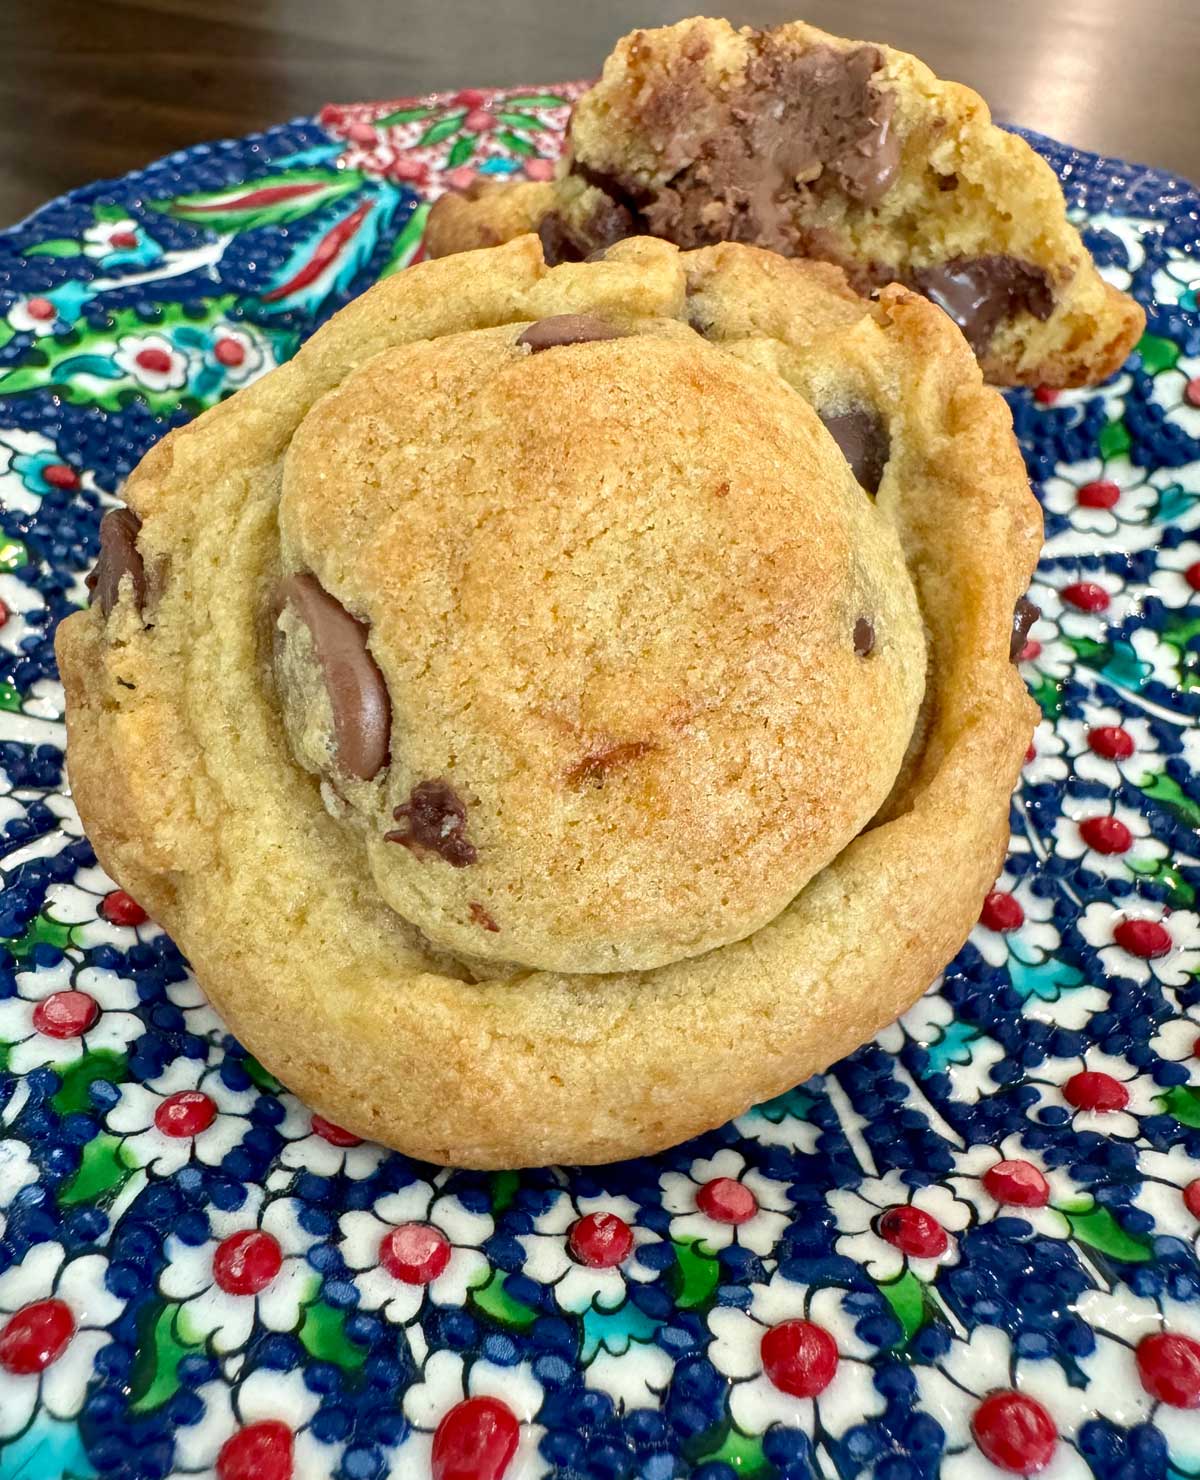 Soft chocolate chip cookies made with melted butter and instant pudding mix.